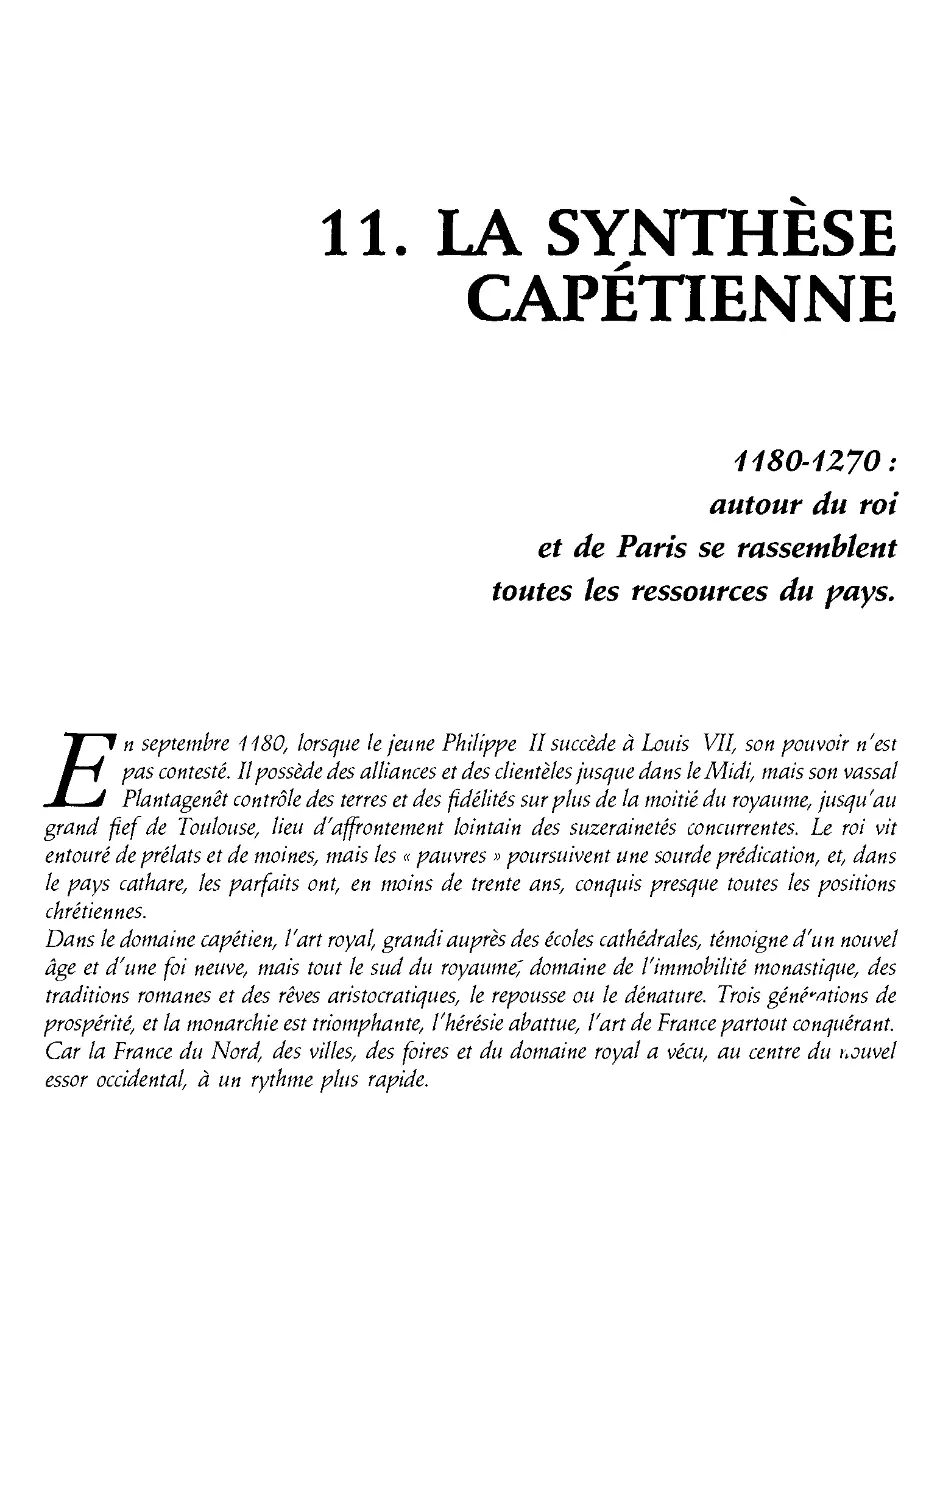 11. La synthese capetienne, 1180-1270 [257]